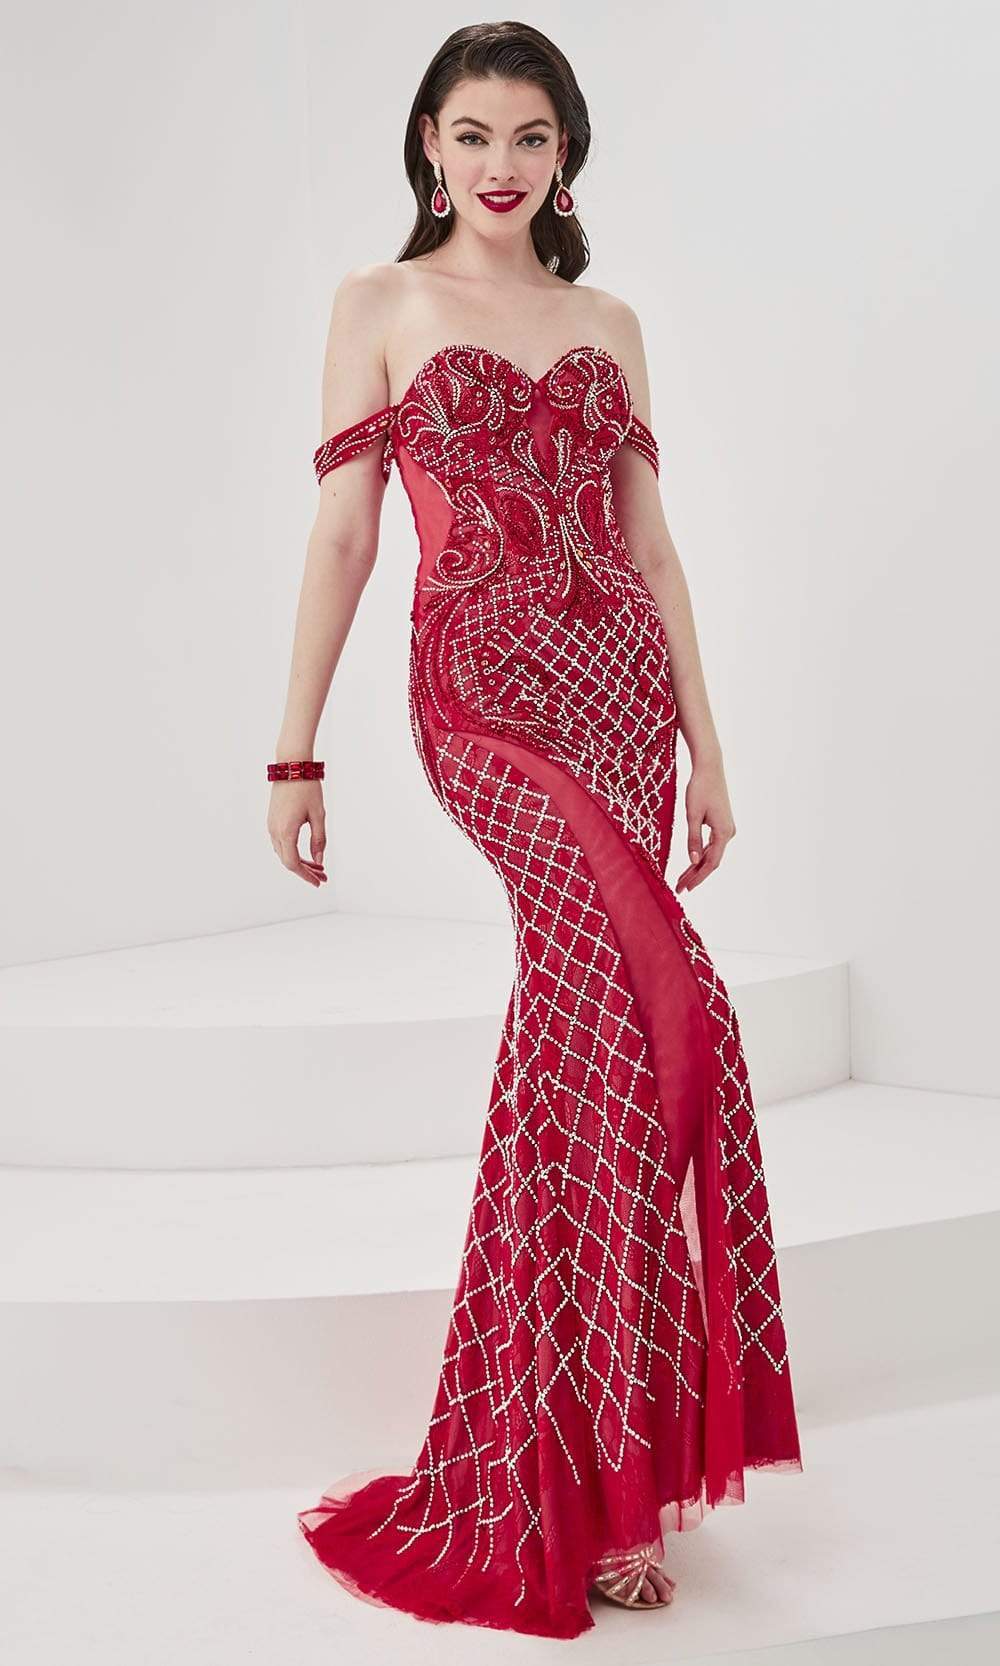 Panoply - 14079 Sweetheart Neck Double Sheer Slit Fully Beaded Gown Evening Dresses 0 / Red